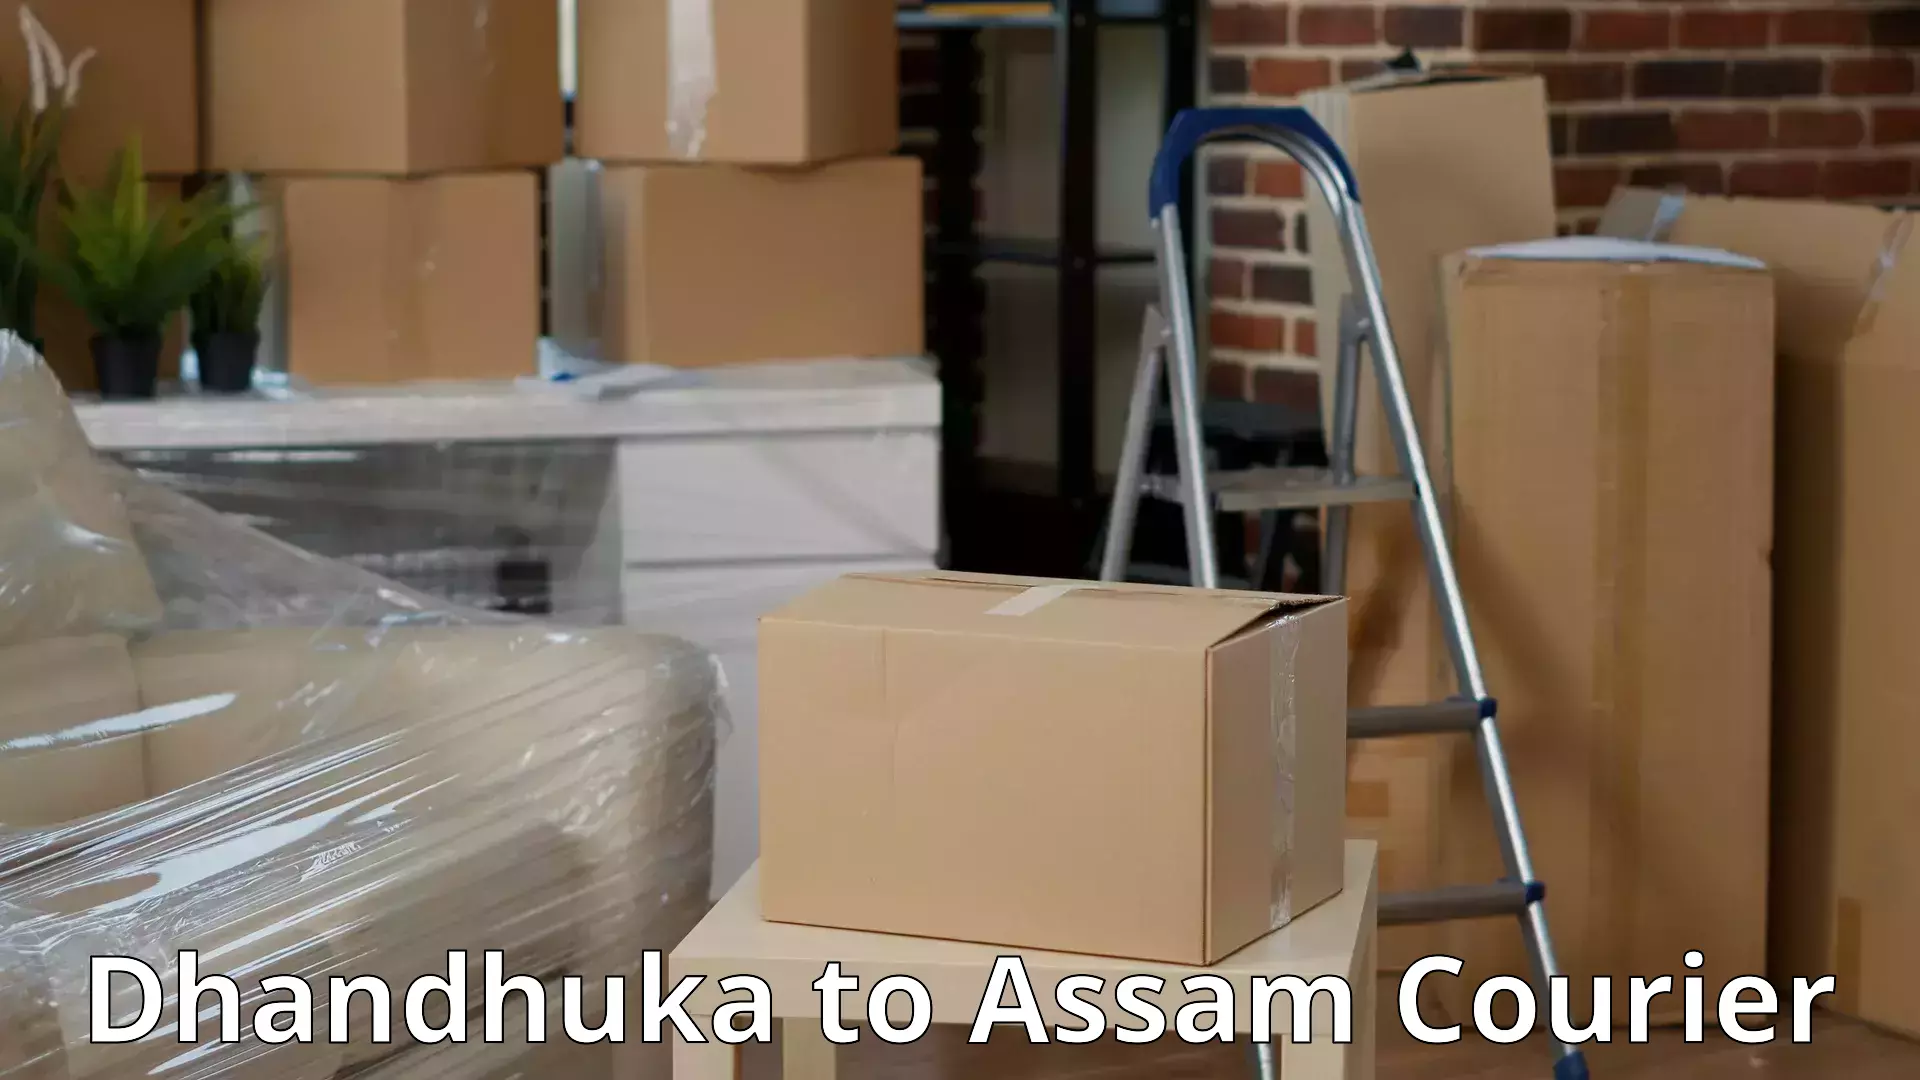 Moving and storage services in Dhandhuka to Marigaon